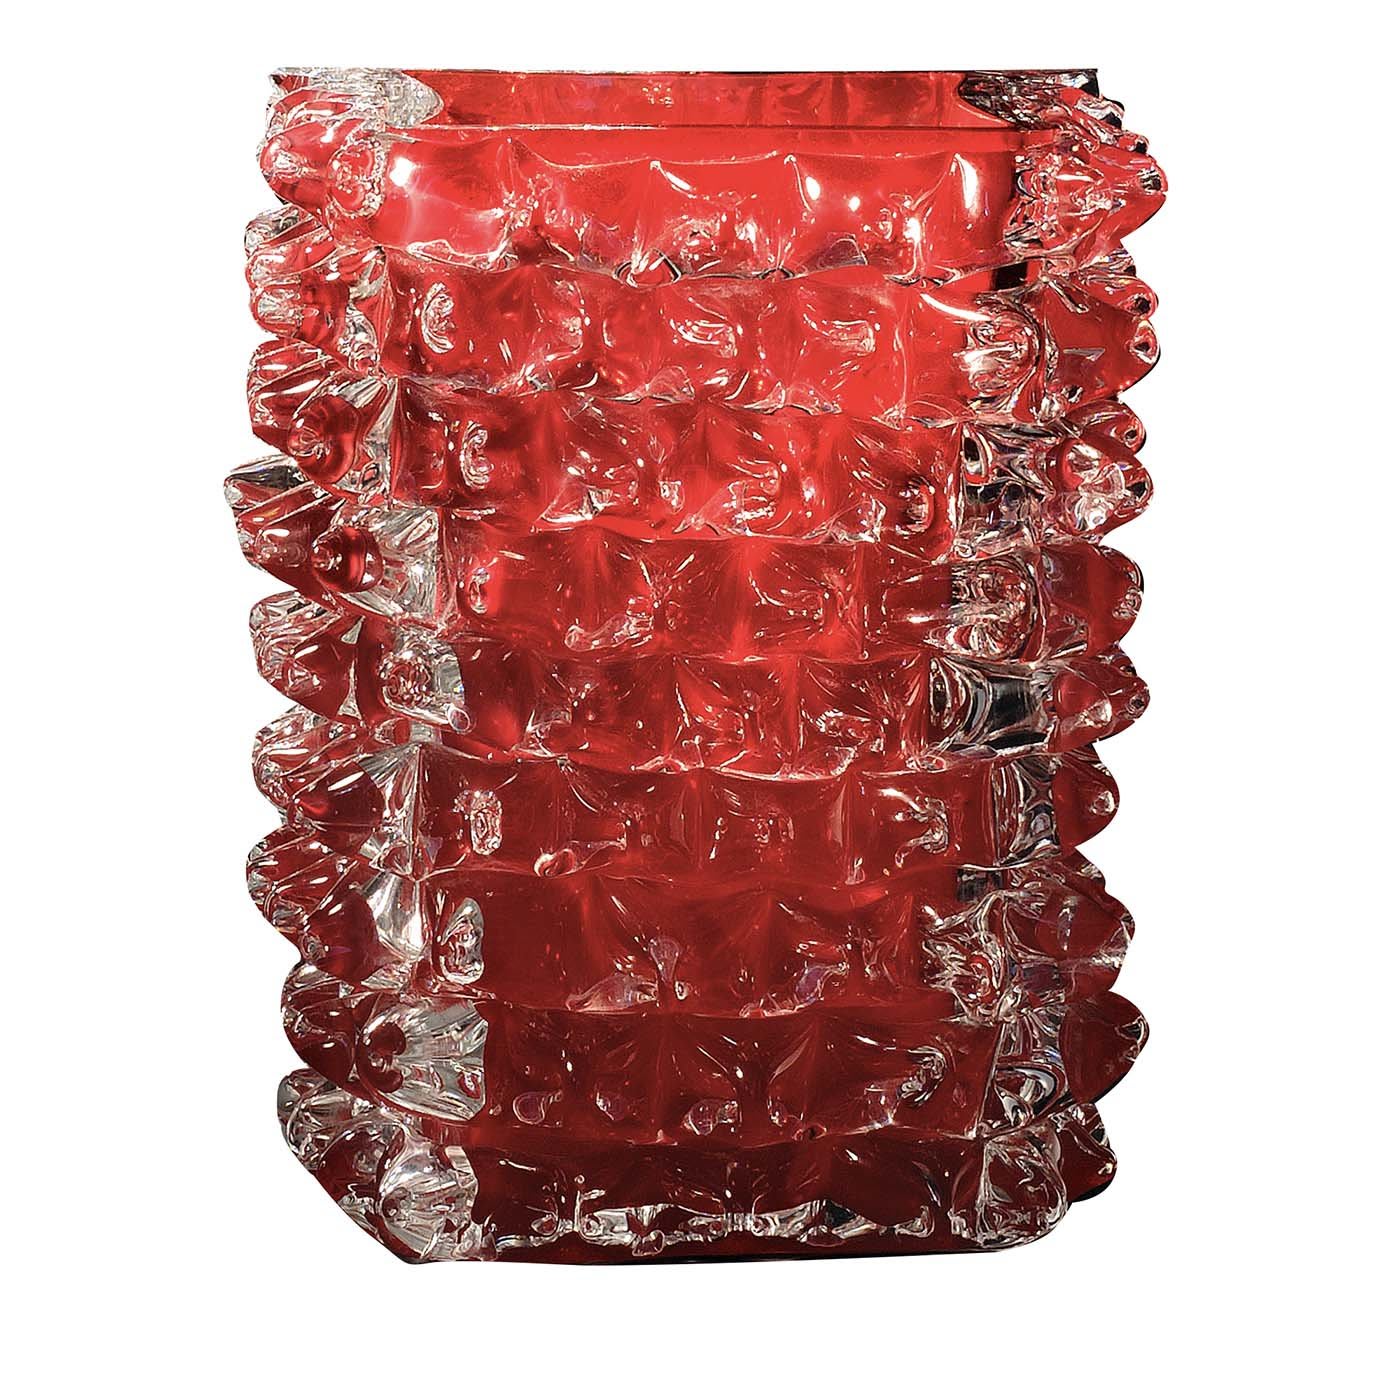 Rostri Small Red Vase - Fornace Mian